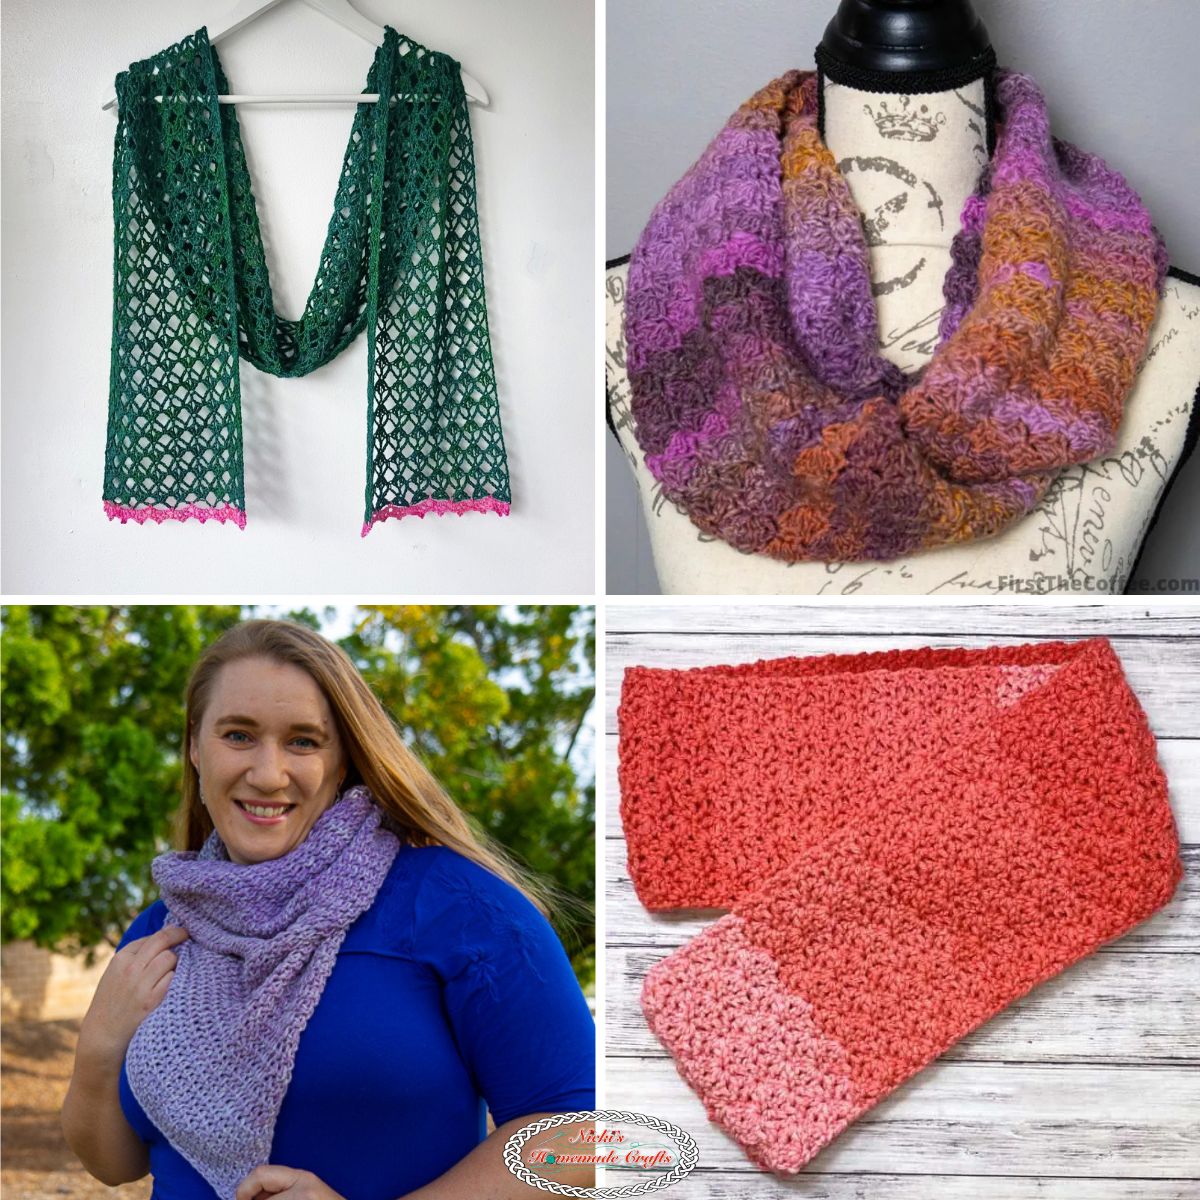 10 Quick & Easy One Skein Crochet Scarf Projects - FREE! - Nicki's Homemade  Crafts